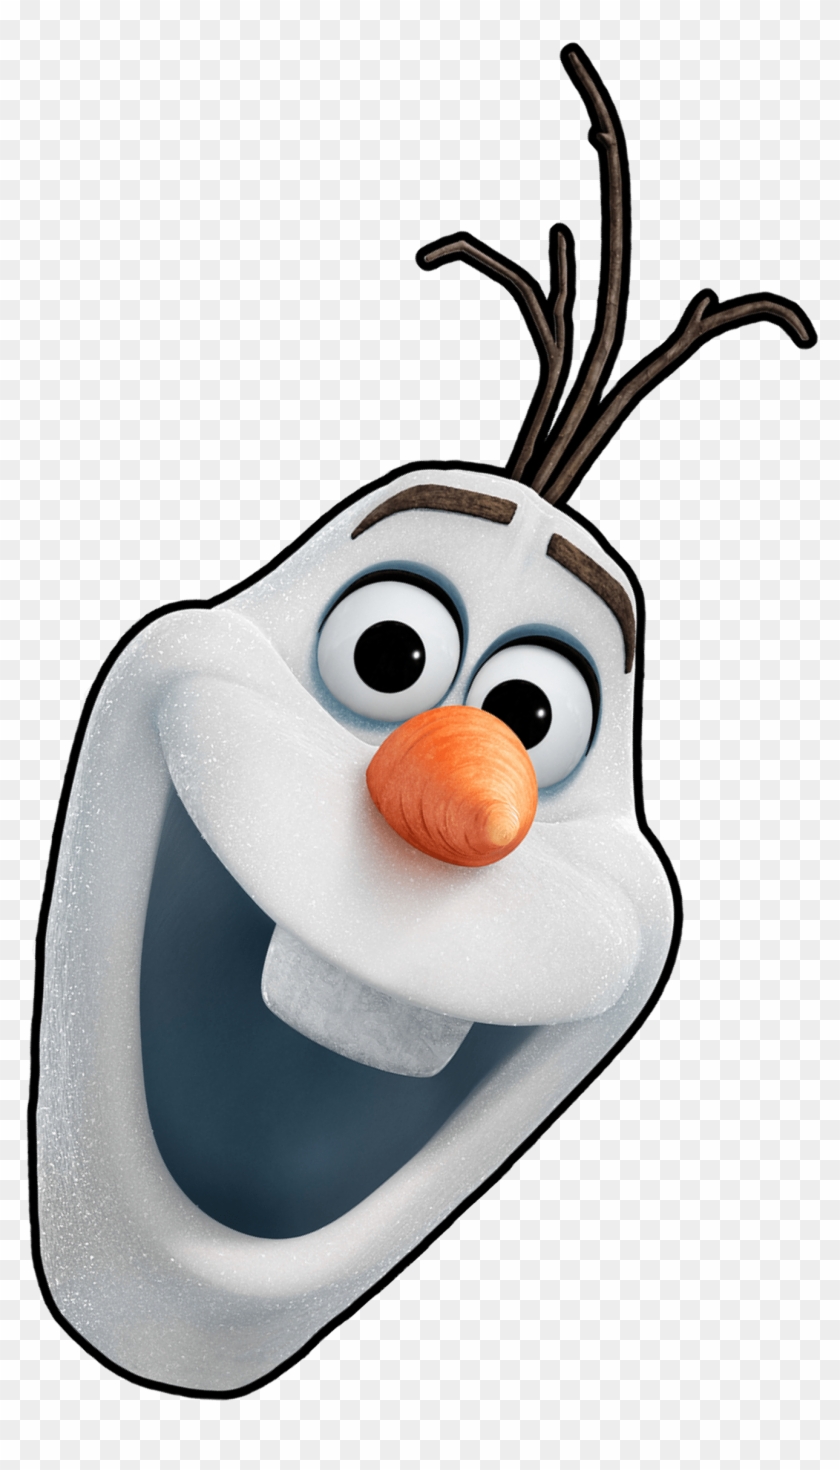 free-olaf-printable-do-you-want-to-build-a-snowman-pin-on-basteln